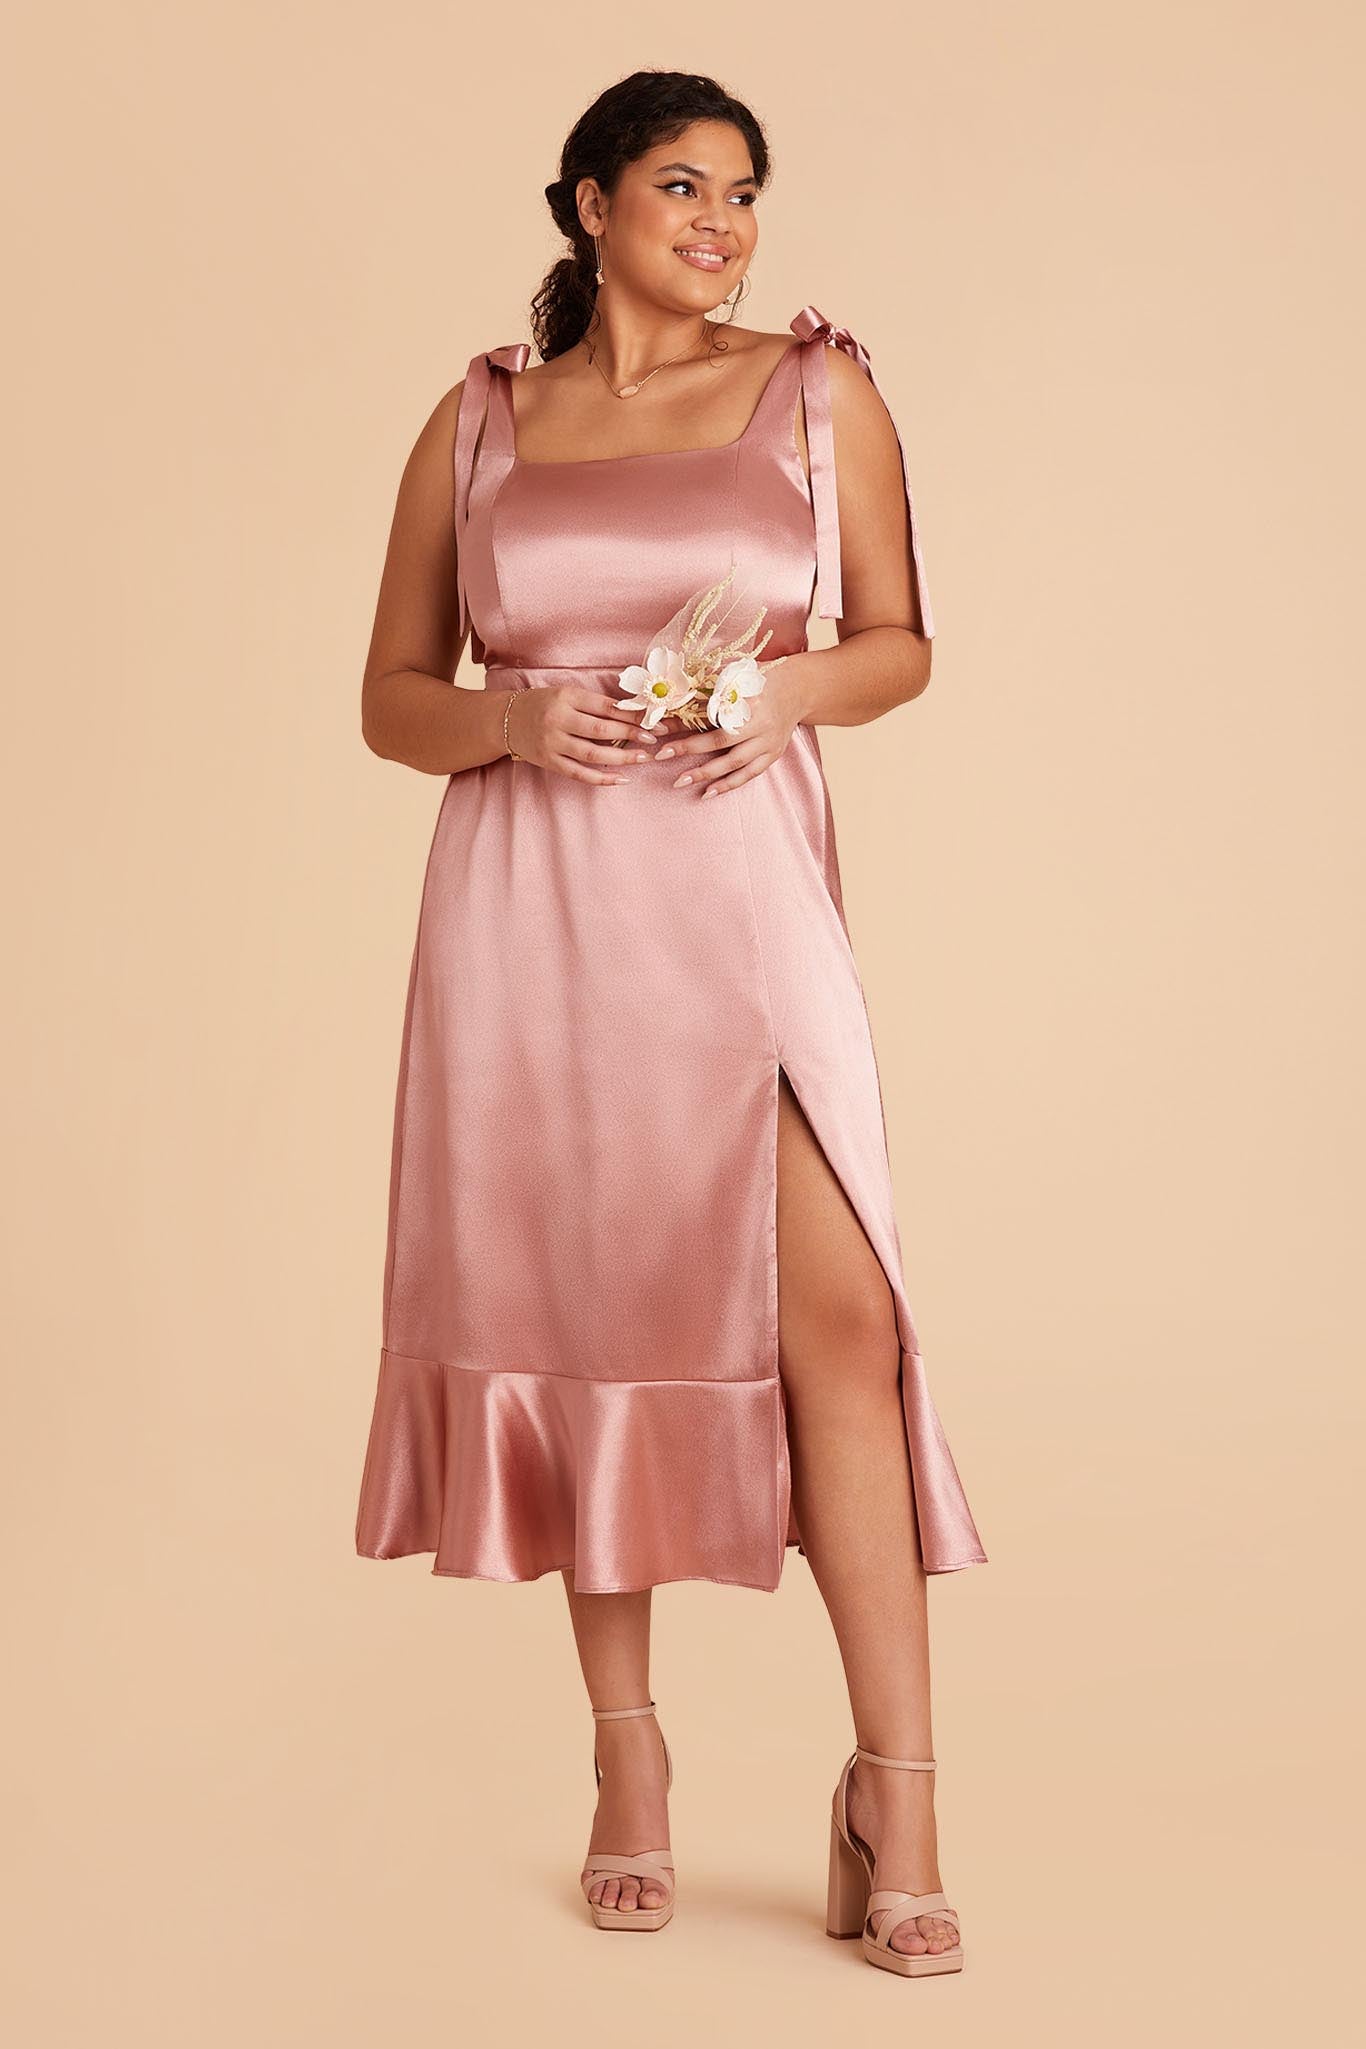 Eugenia - A statement satin gown